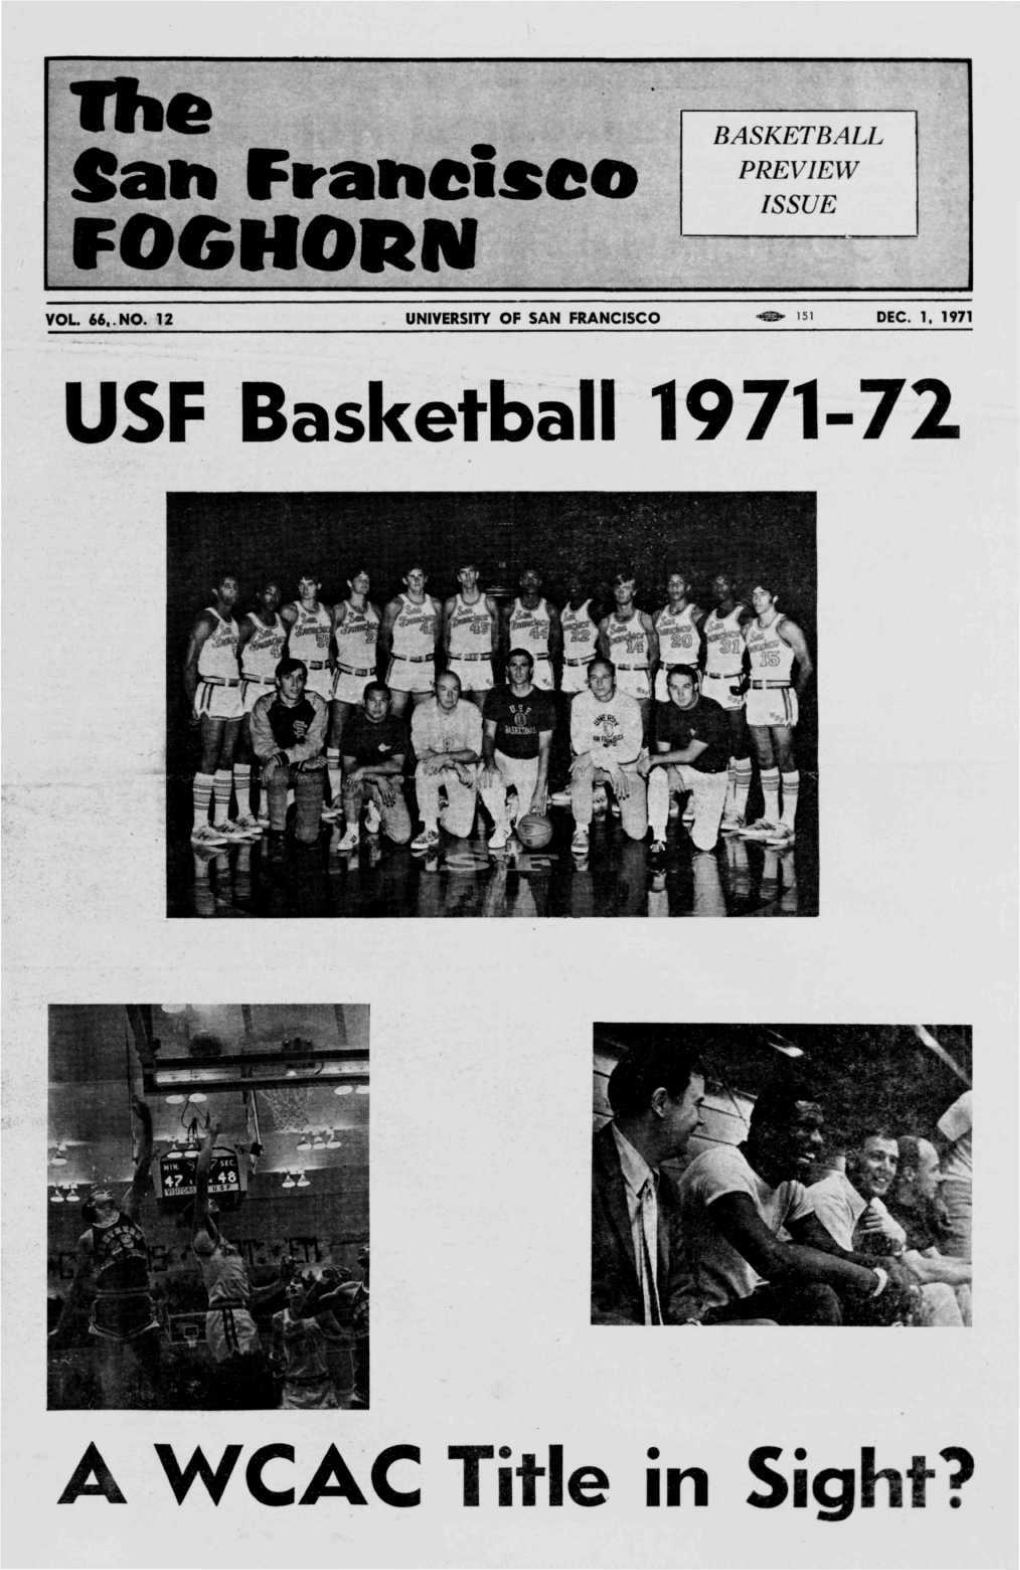 USF Basketball 1971-72 a WCAC Title In